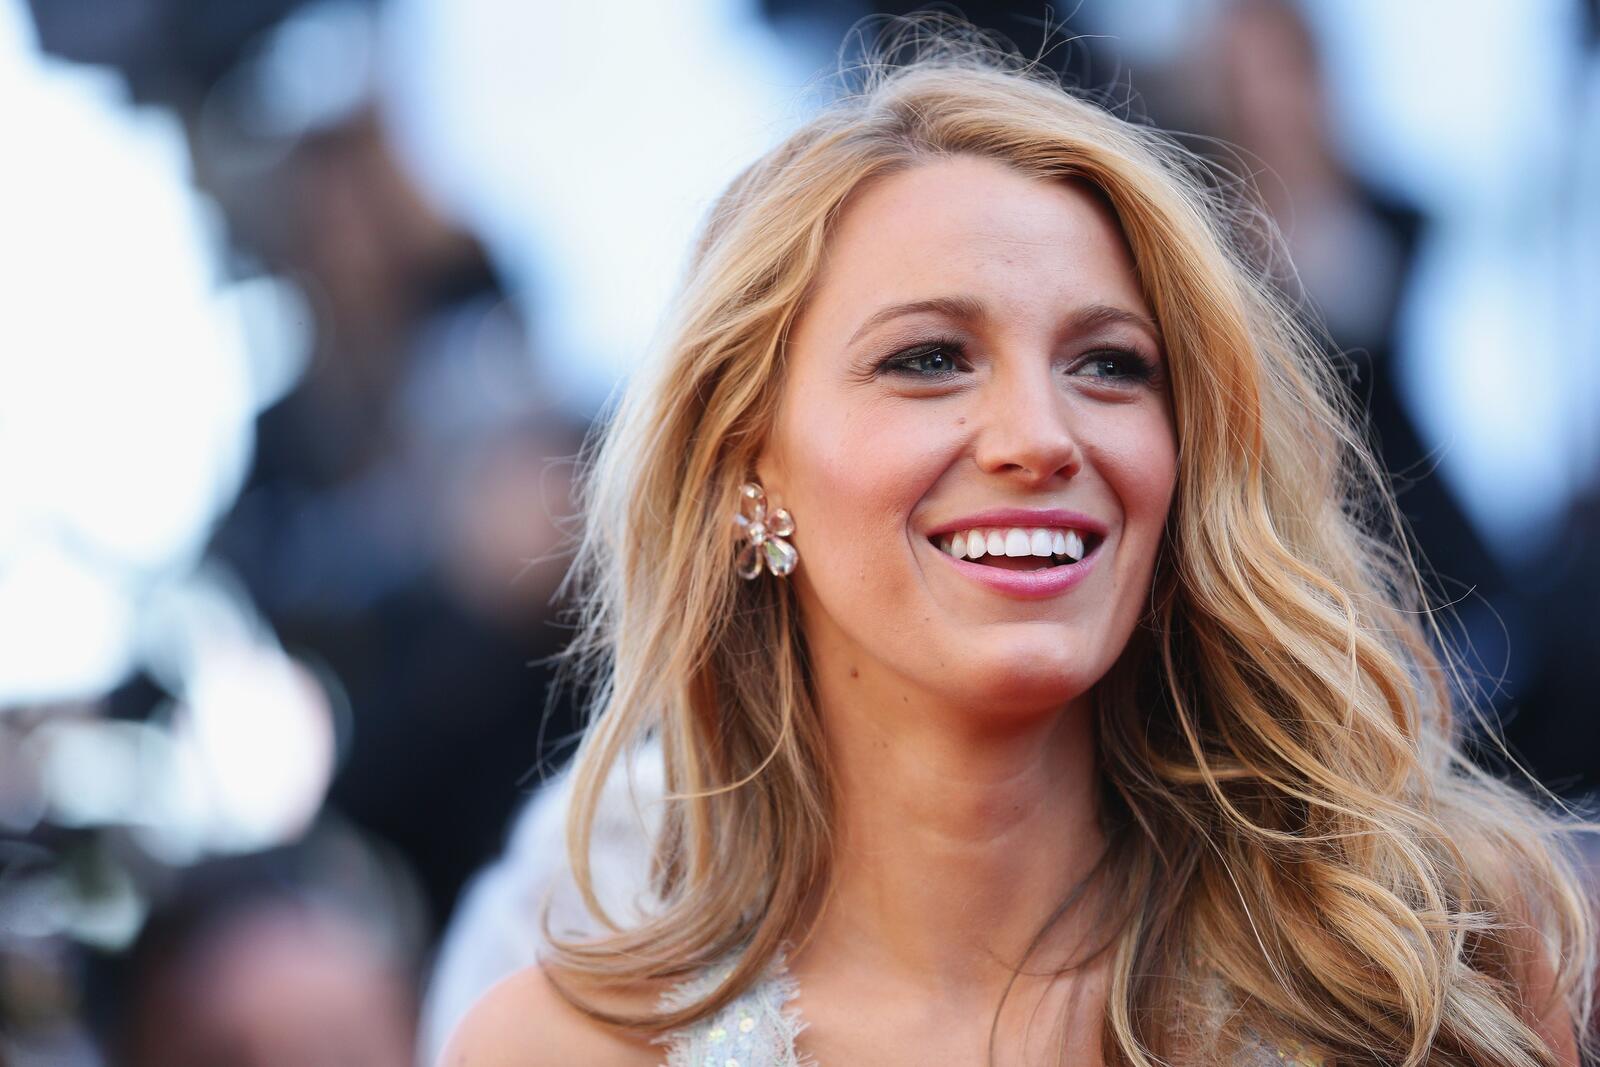 Wallpapers celebrities Blake Lively face on the desktop